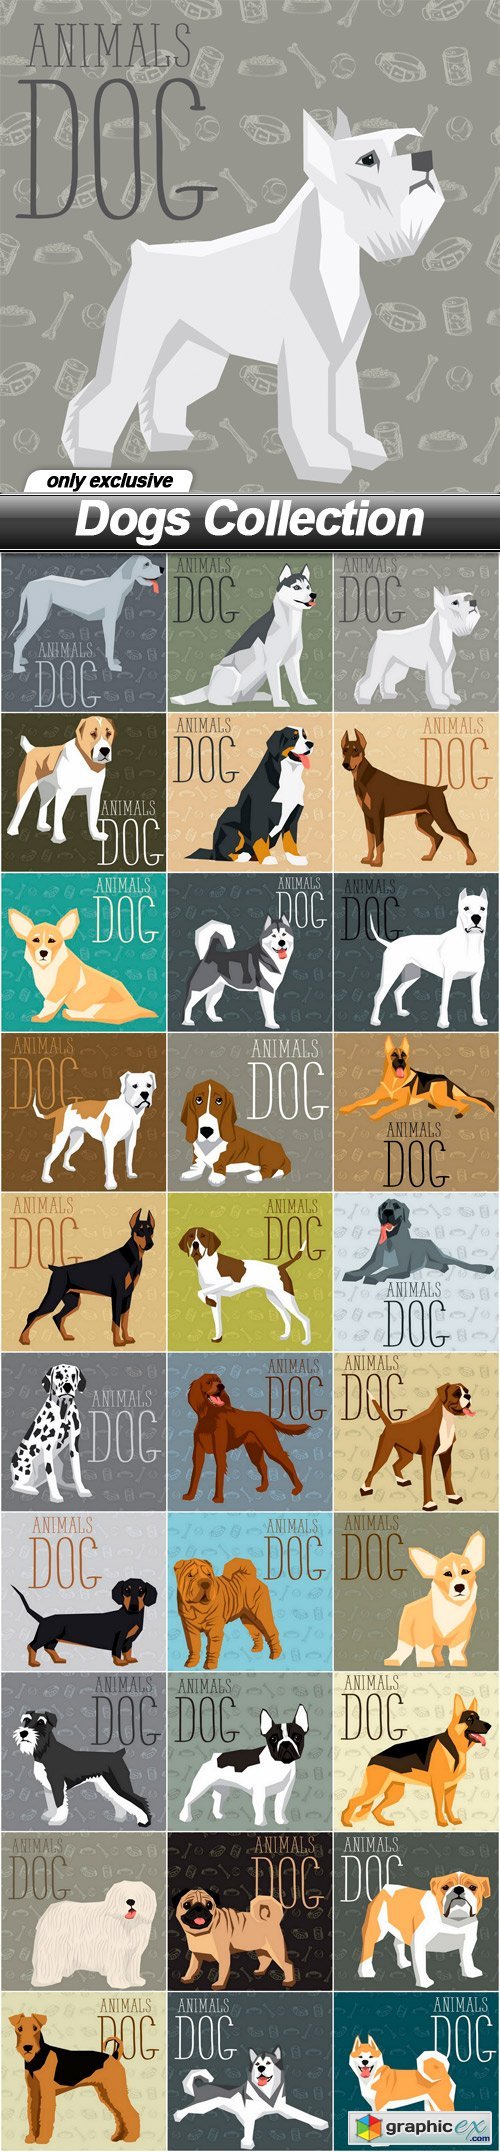 Dogs Collection - 30 EPS